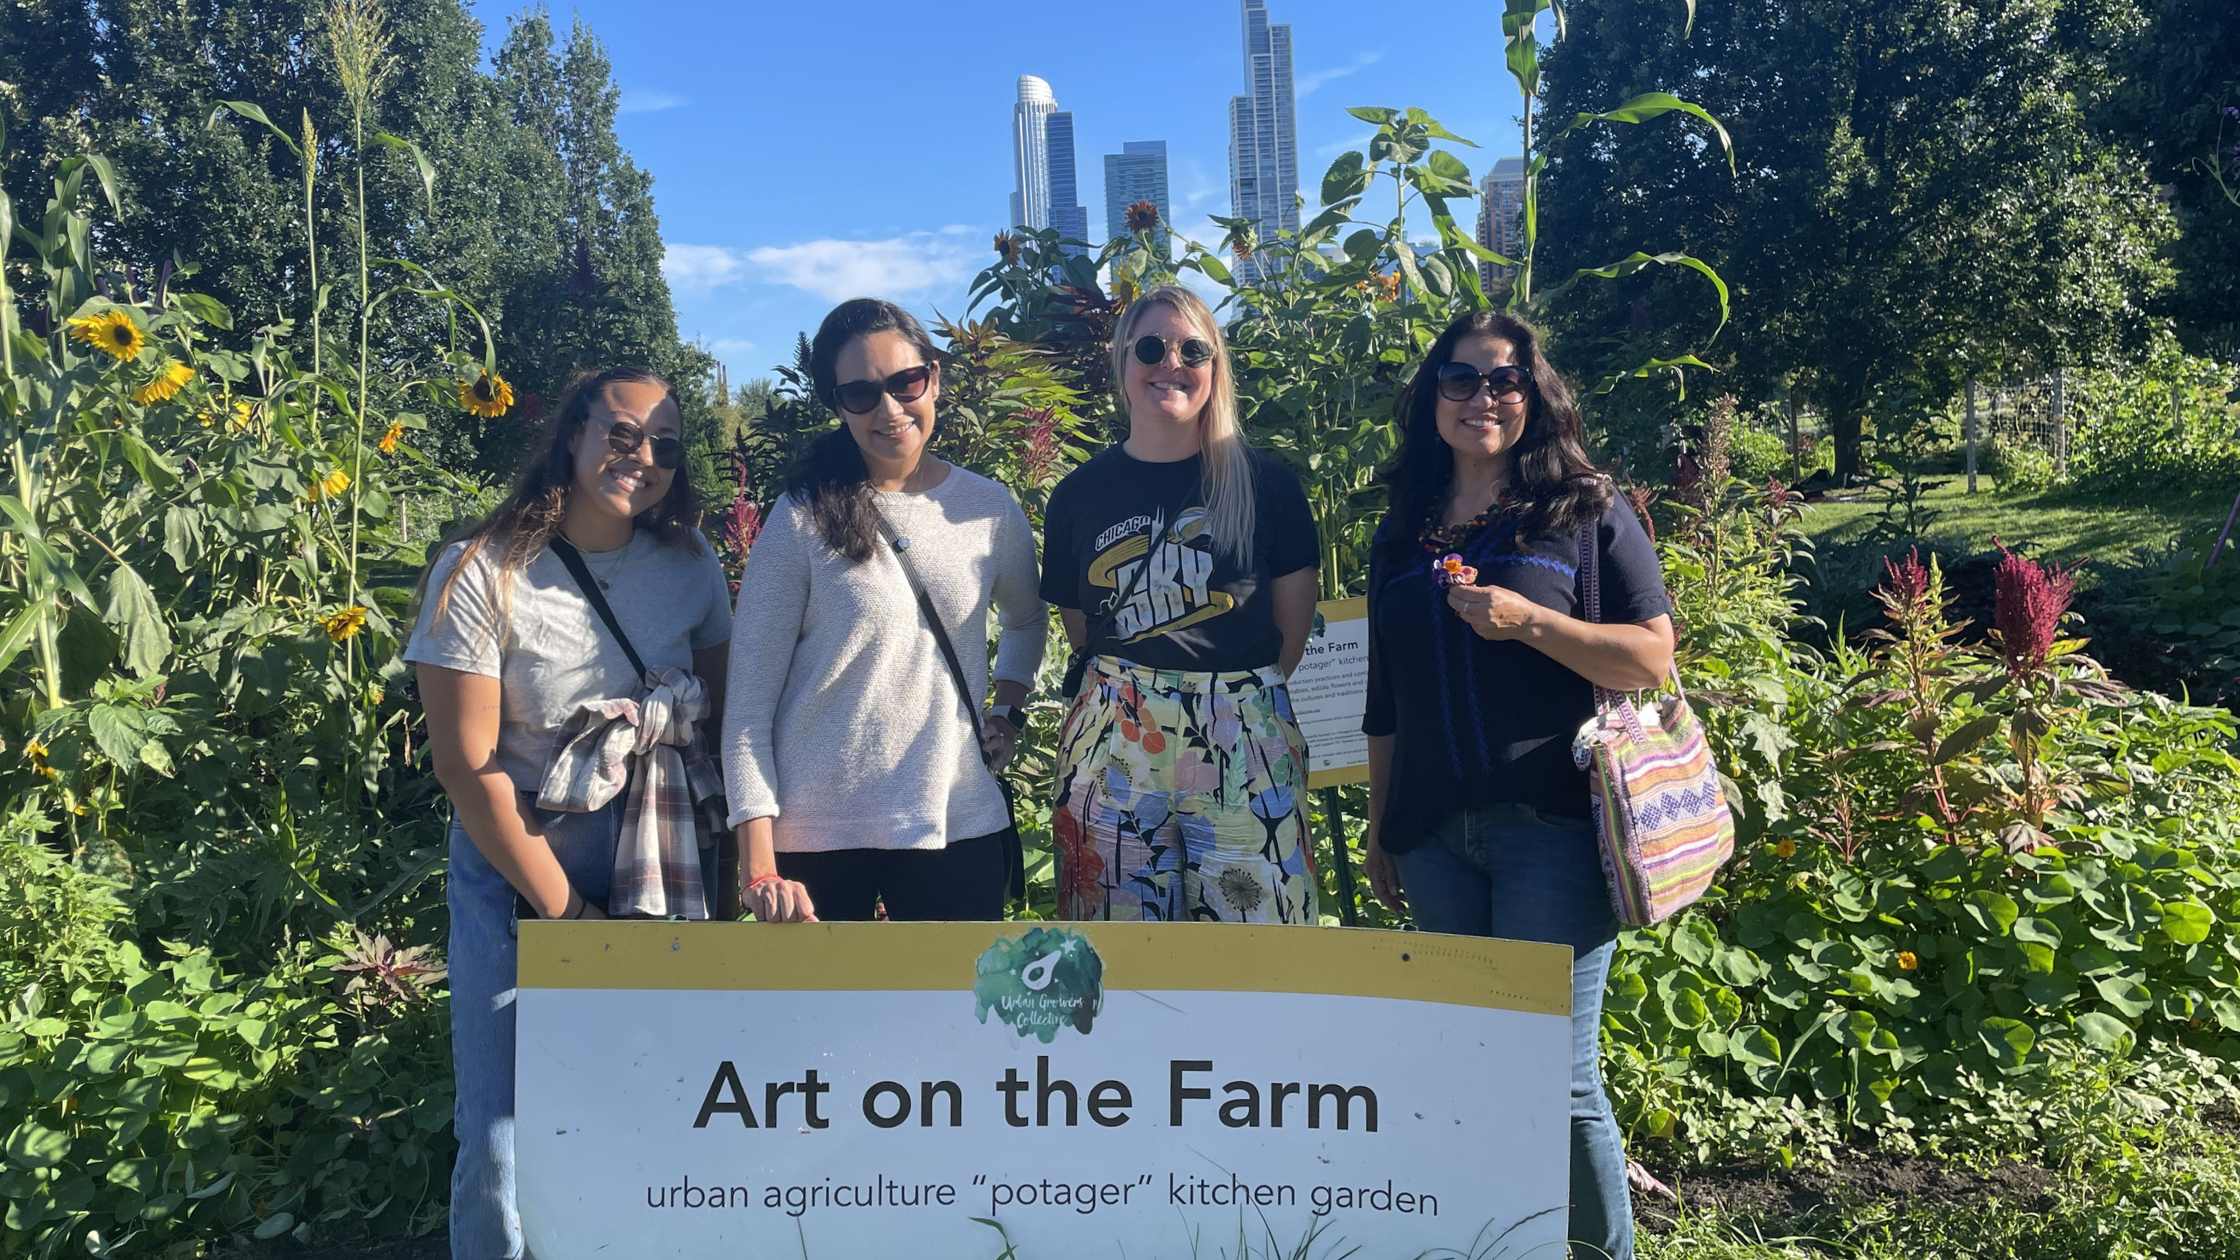 Healthy Communities Foundation team at Urban Growers Collective's "Art on the Farm" Grant Park Farm in Chicago.